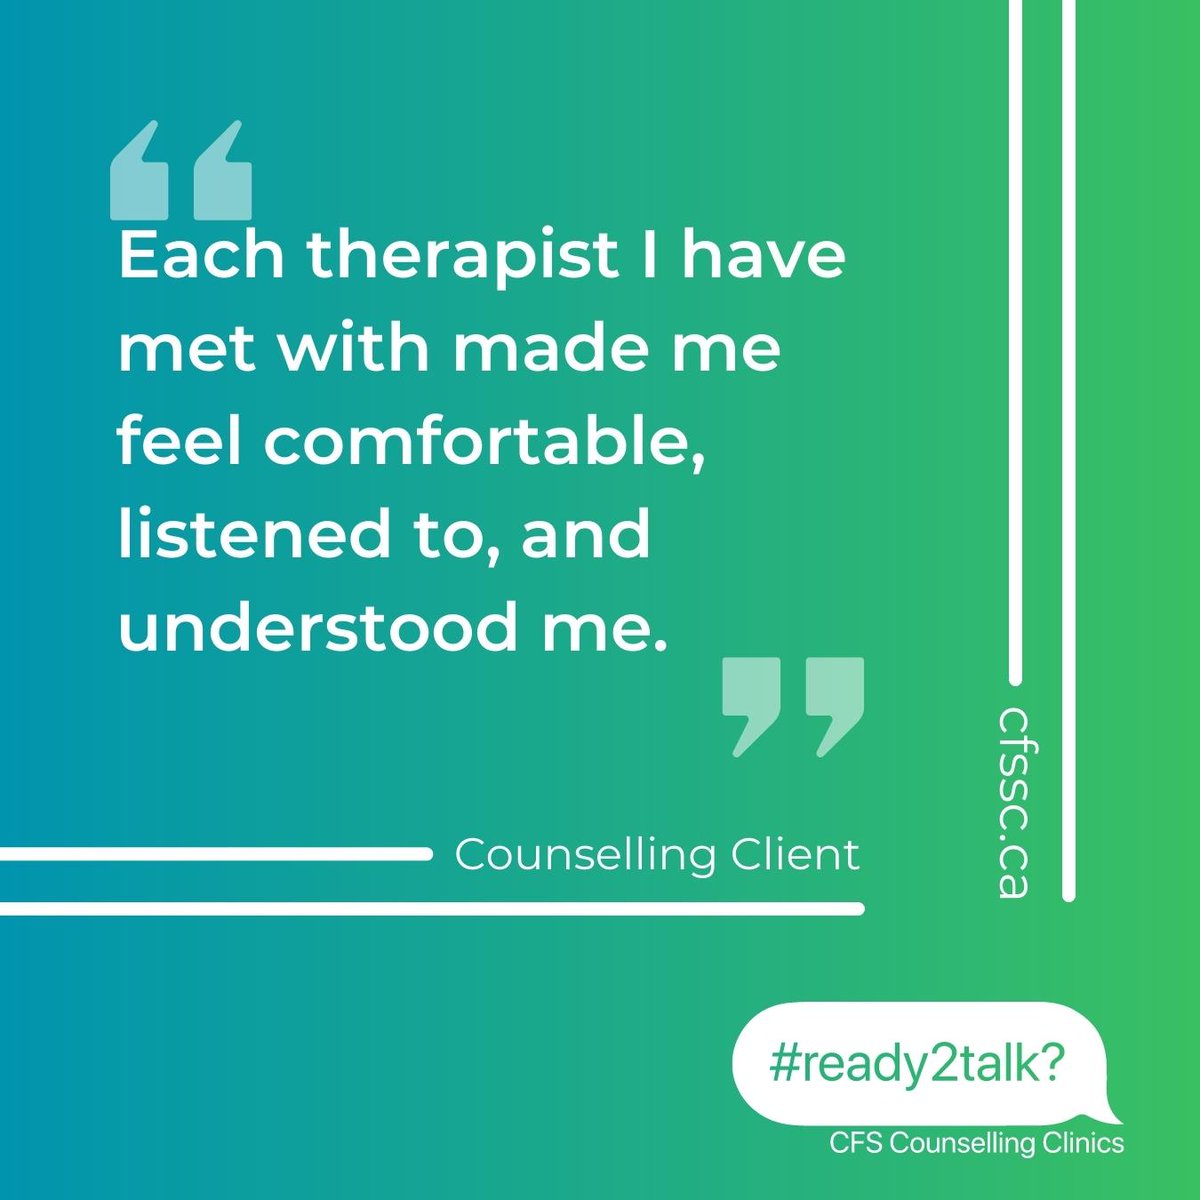 #CFS's counsellors are registered professionals who are #Here4U. #ready2talk? Our online booking tool is open 24/7. cfssc.ca #HopeLivesHere